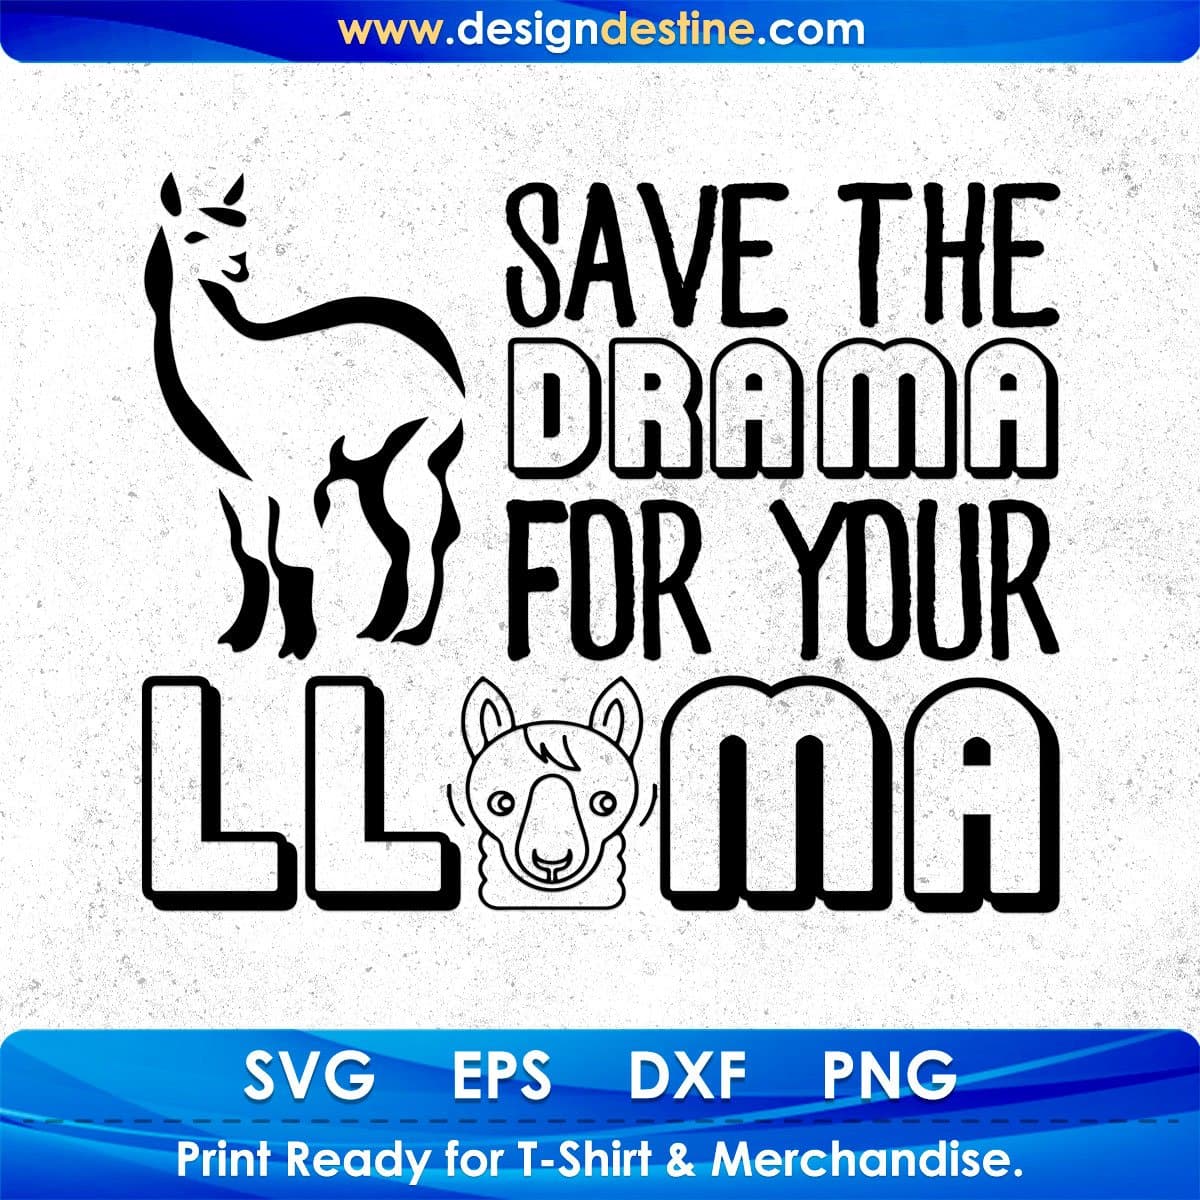 Save The Drama For Your Llama T shirt Design In Svg Png Cutting Printable Files